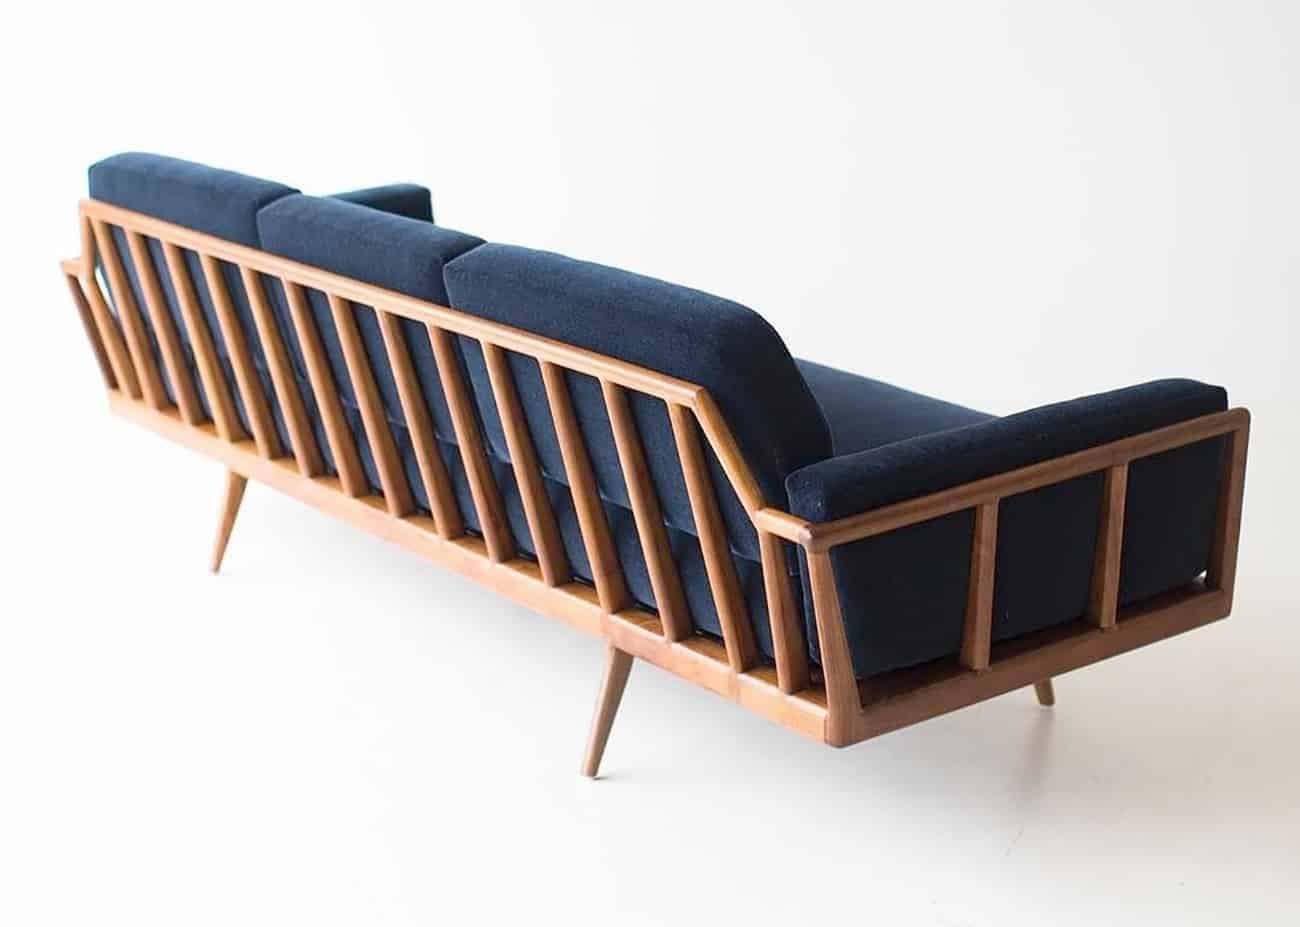 Smilow Design Makes Marvels of the Mid-Century New Again